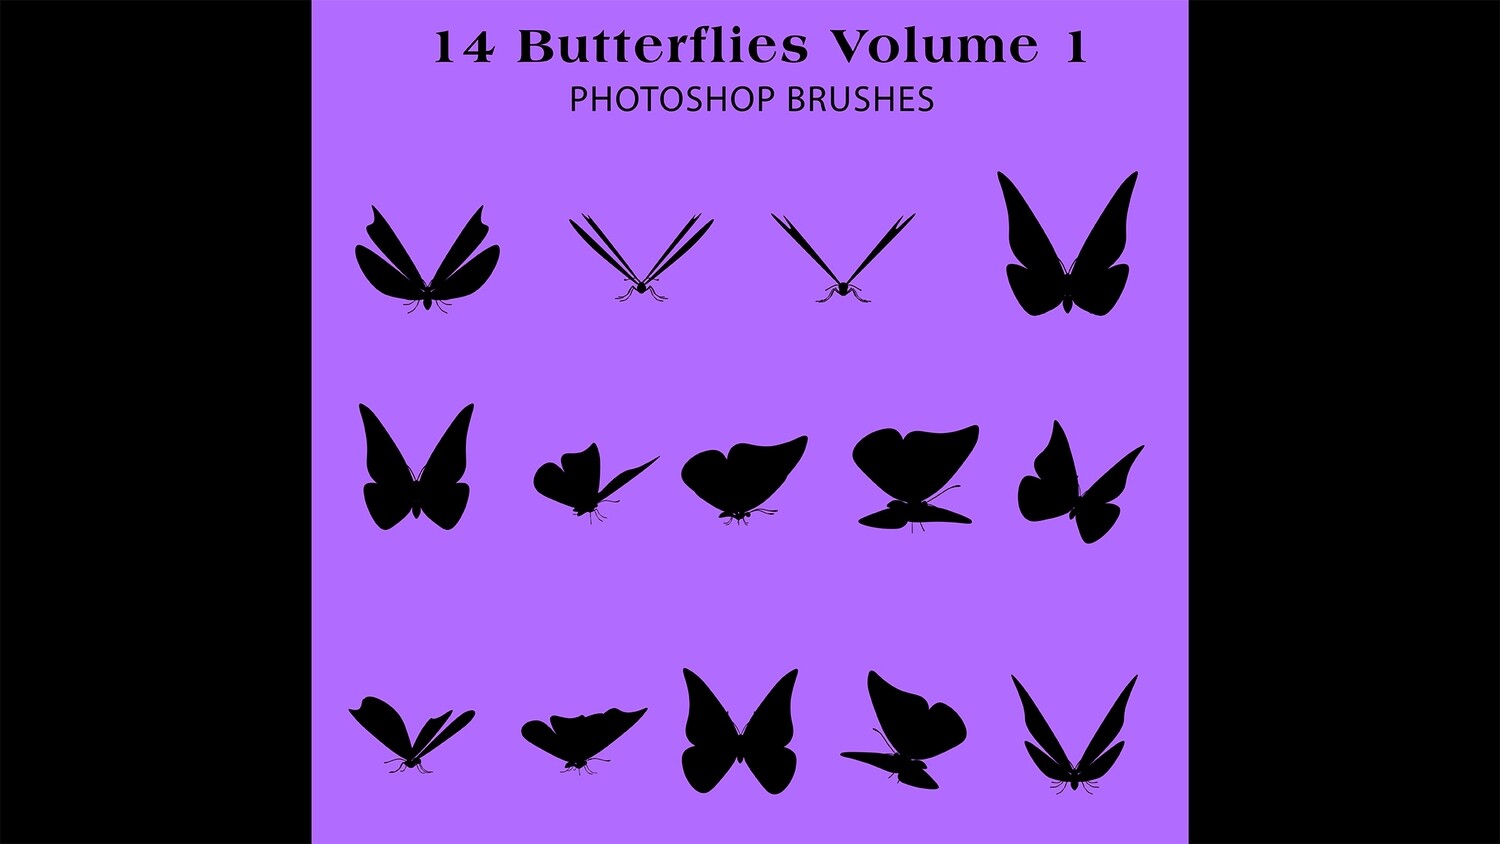 Photoshop Brushes - 14 Butterfly Silhouette Brushes Volume 1